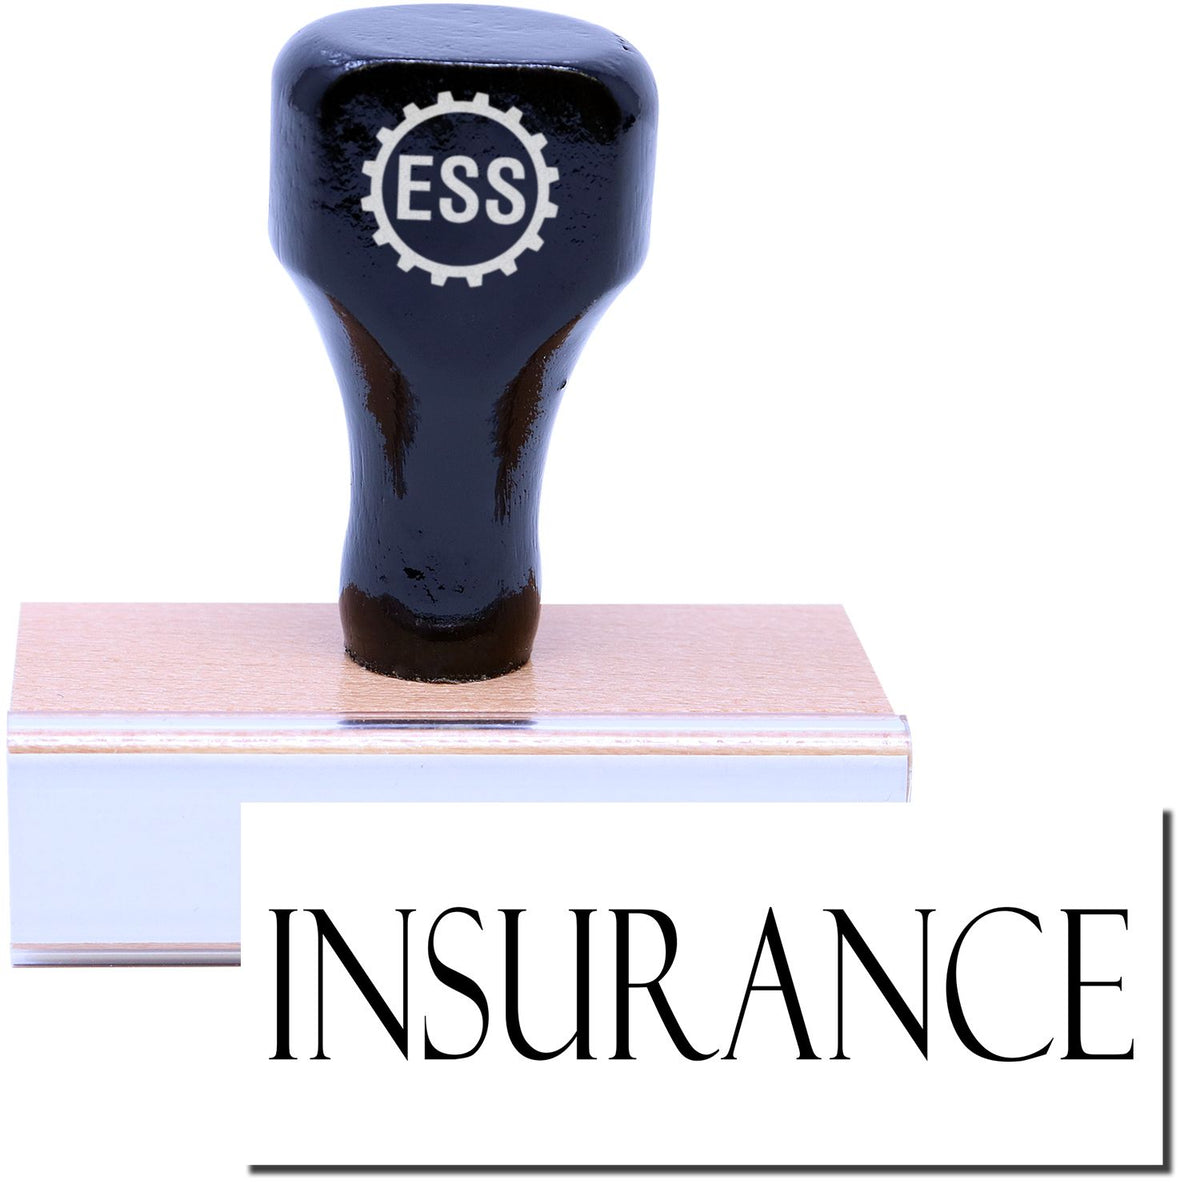 A stock office rubber stamp with a stamped image showing how the text &quot;INSURANCE&quot; in a large font is displayed after stamping.